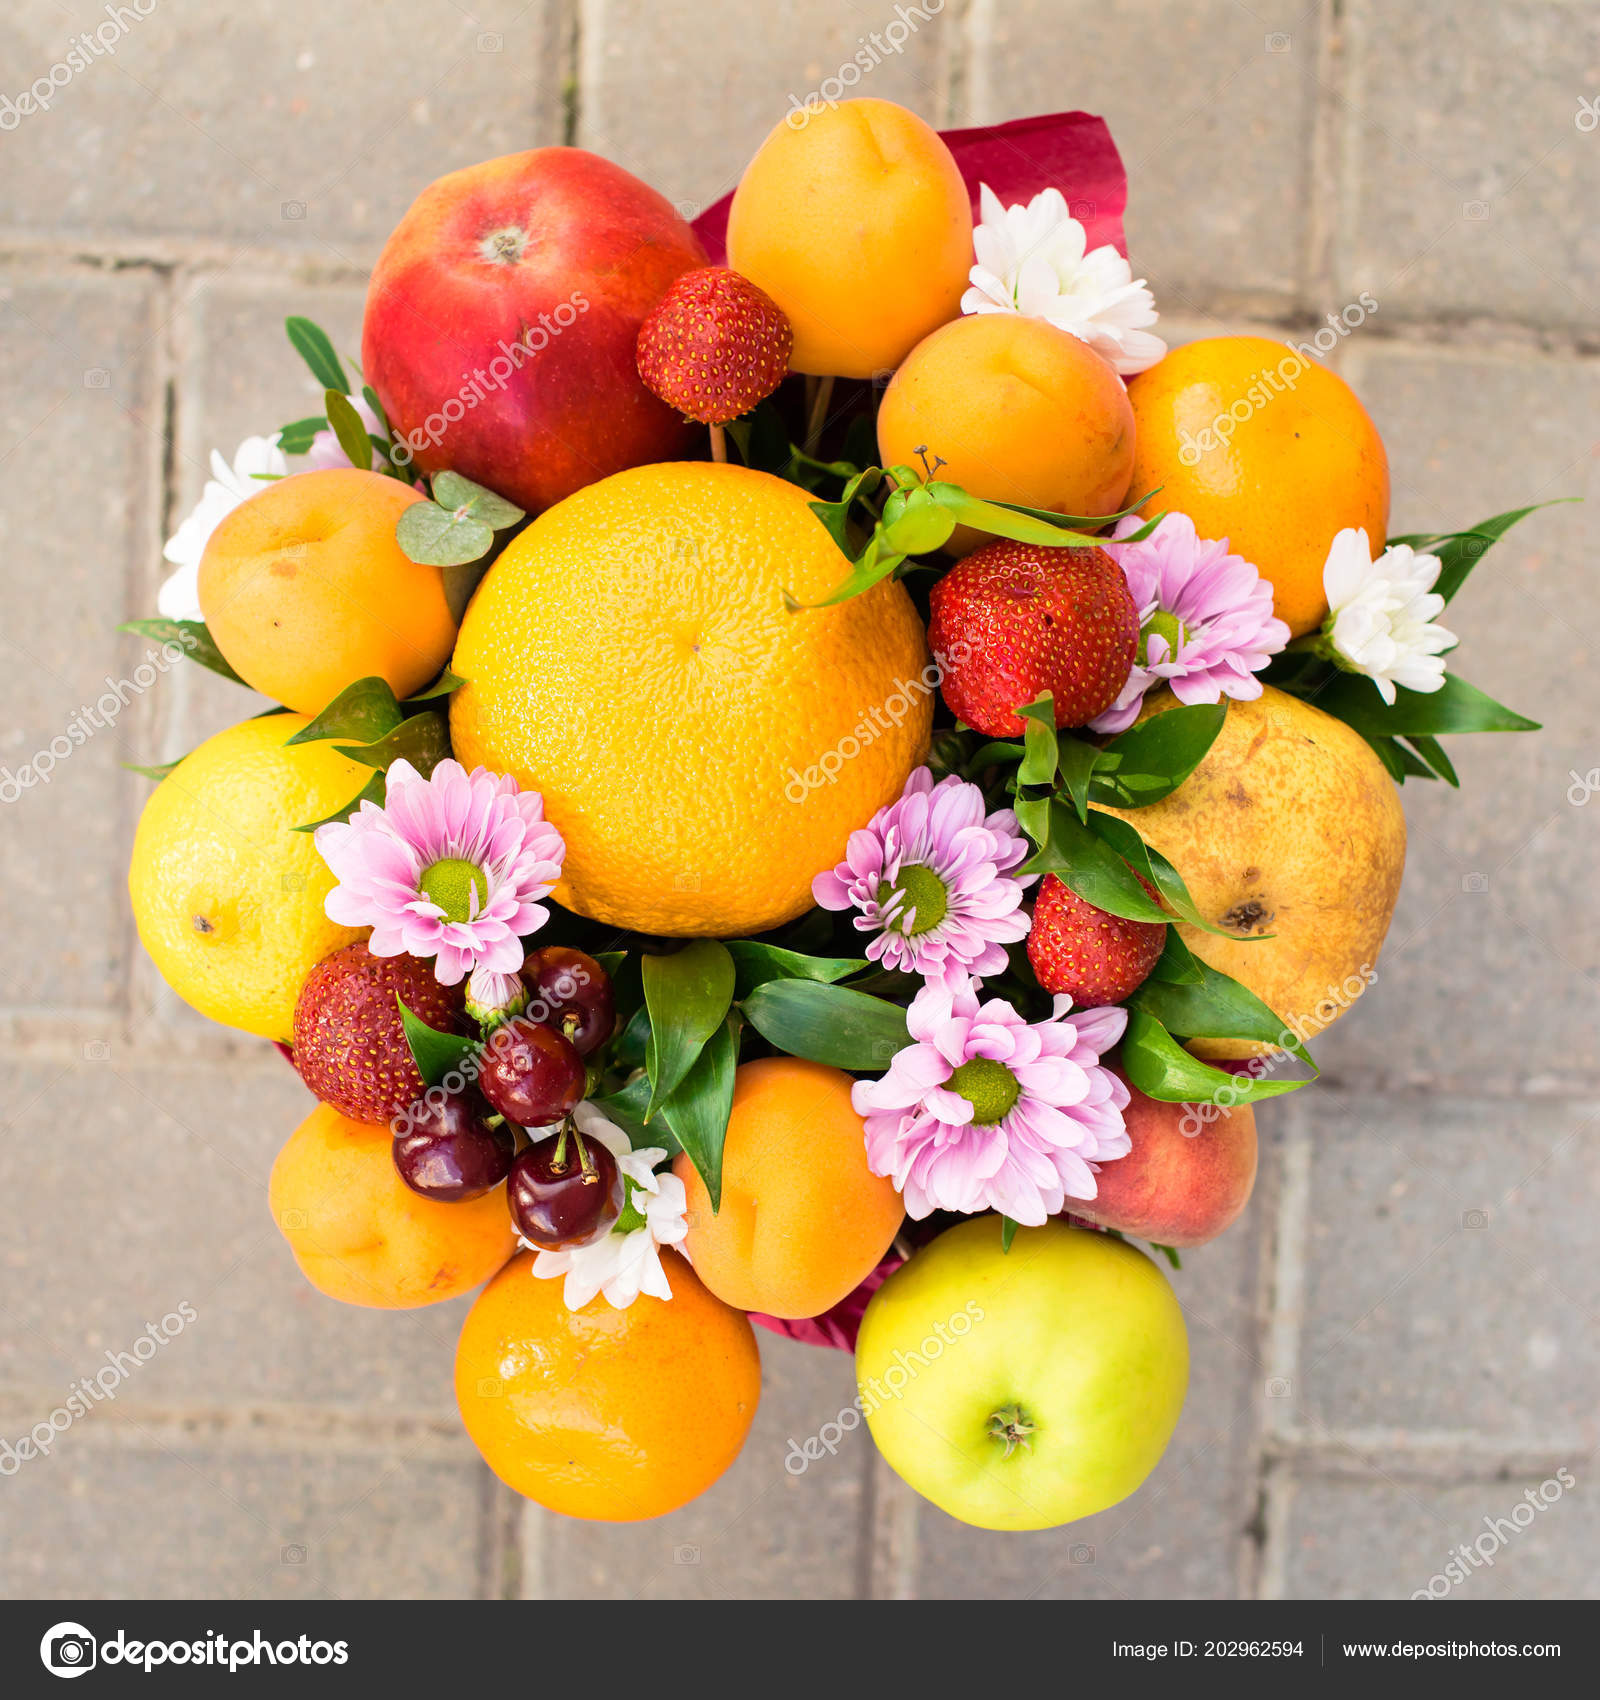 New Original Unusual Fruit Bouquet Outdoors Stock Photo Image By C Smspsy 202962594